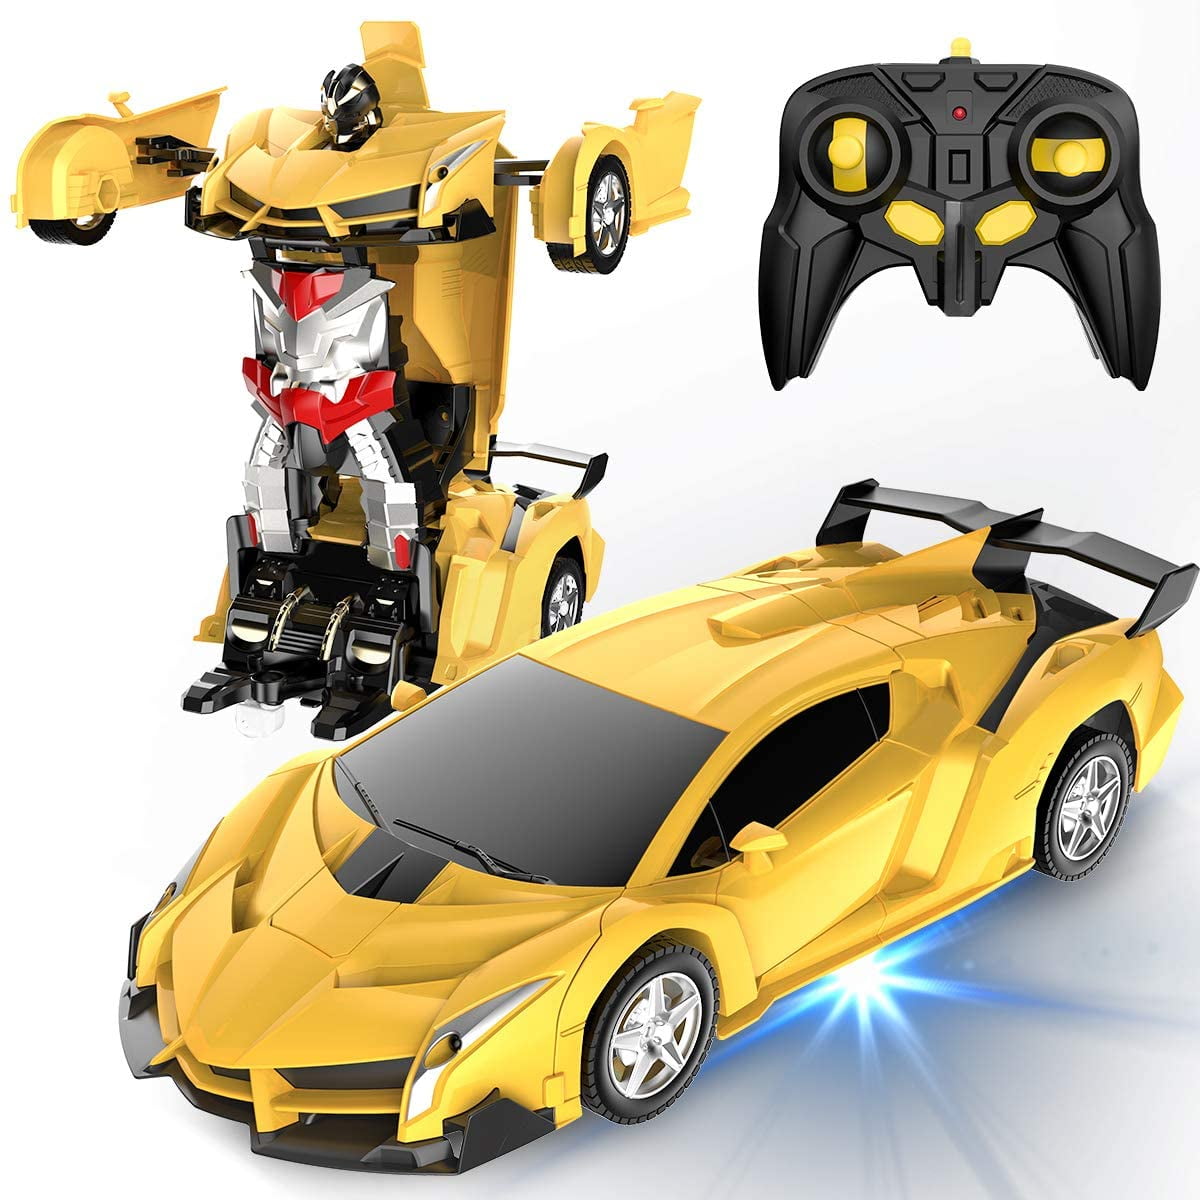 Toys for Kids Transformer RC Robot Car Remote Control 2 IN 1 Boy Baby Xmas Gift